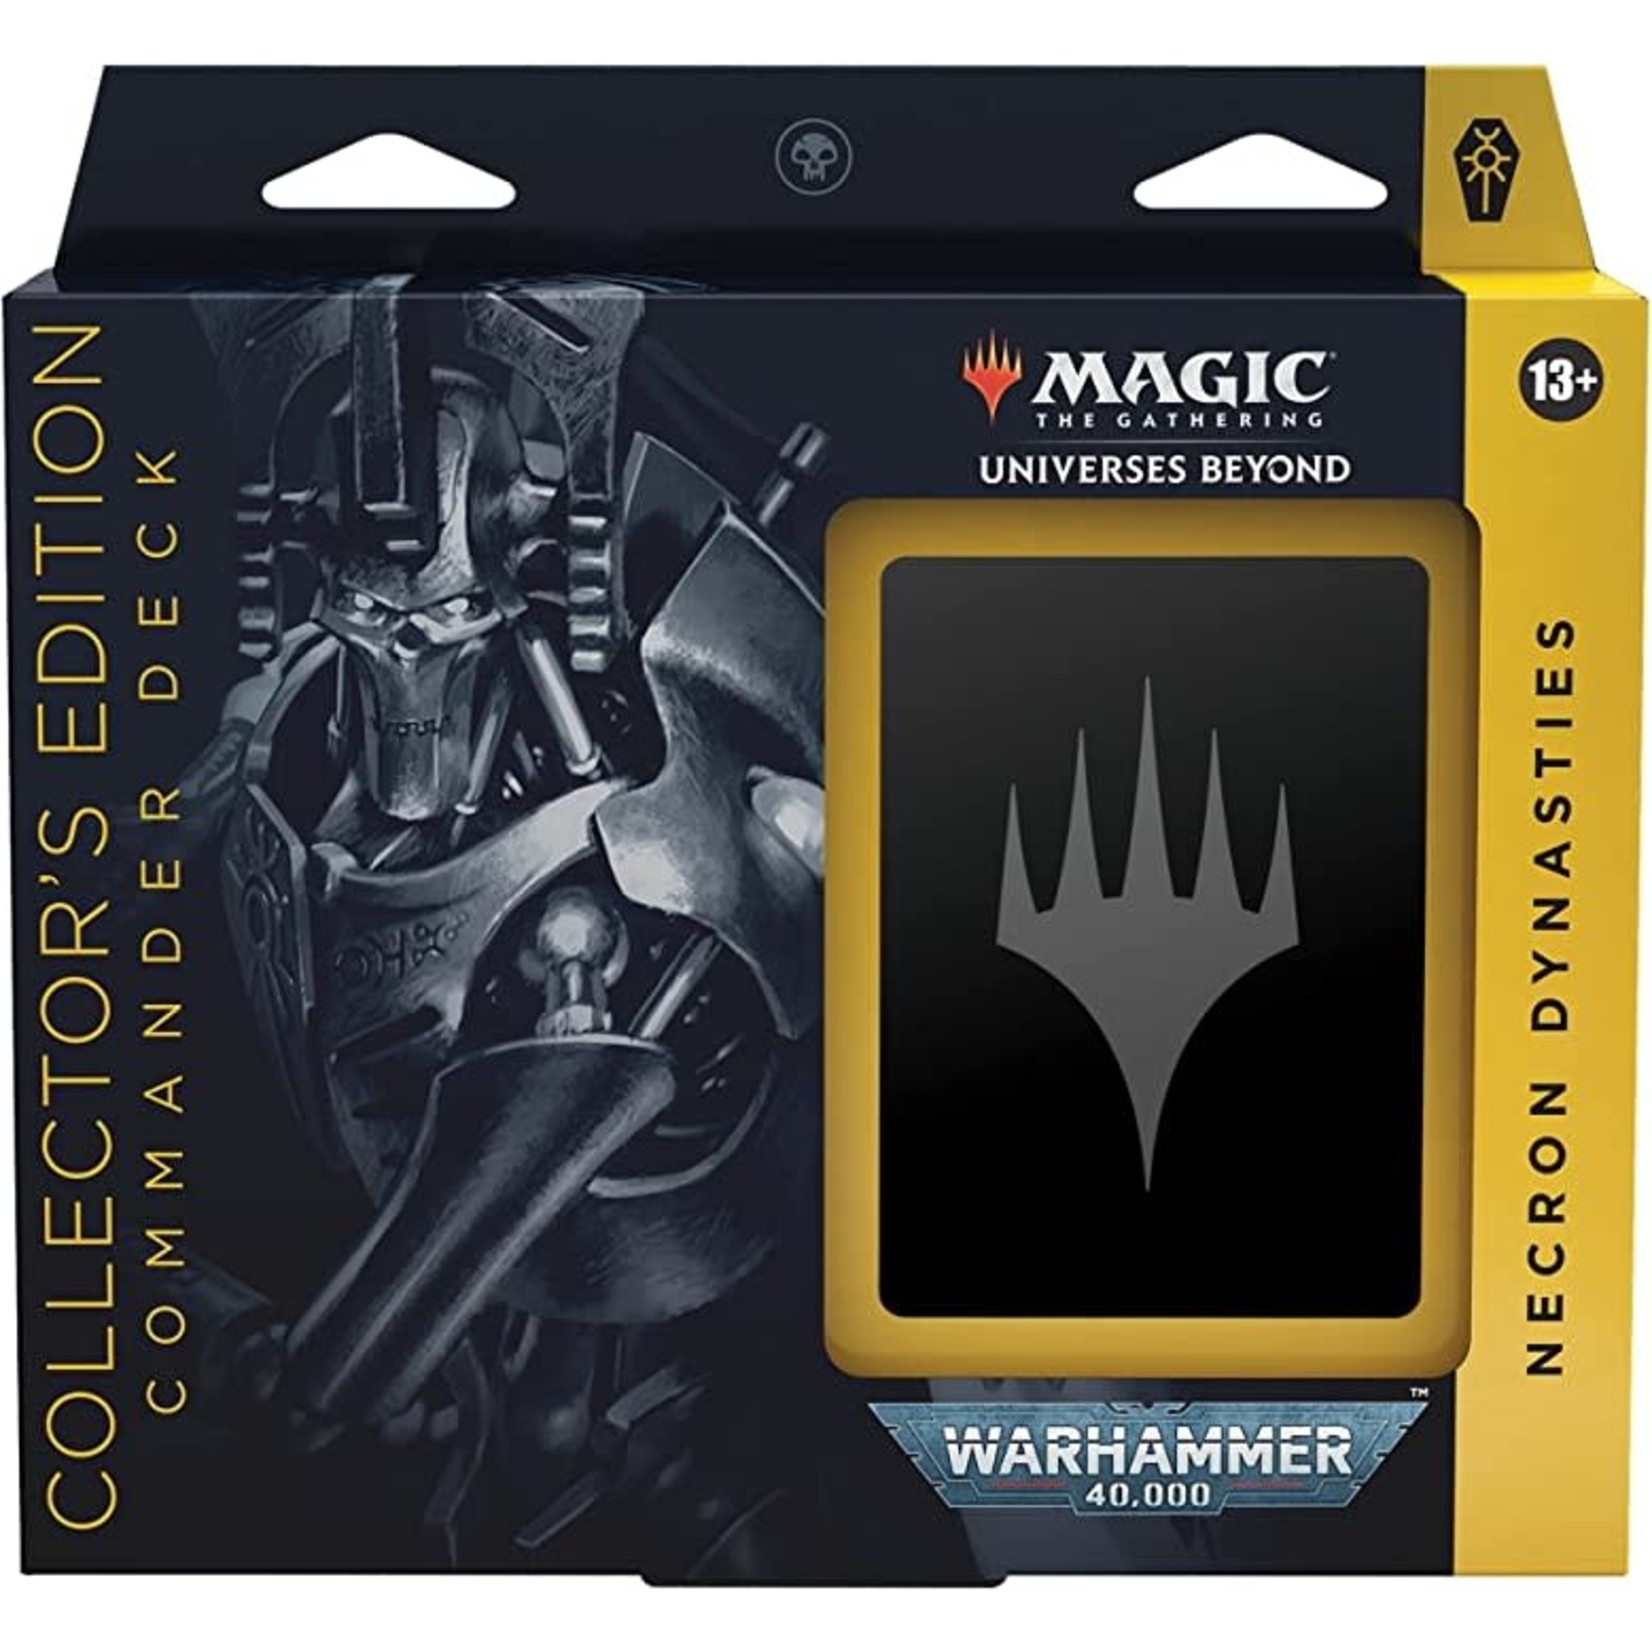 Magic: The Gathering Magic: The Gathering – Warhammer 40,000 Collector's Edition Commander Deck Bundle